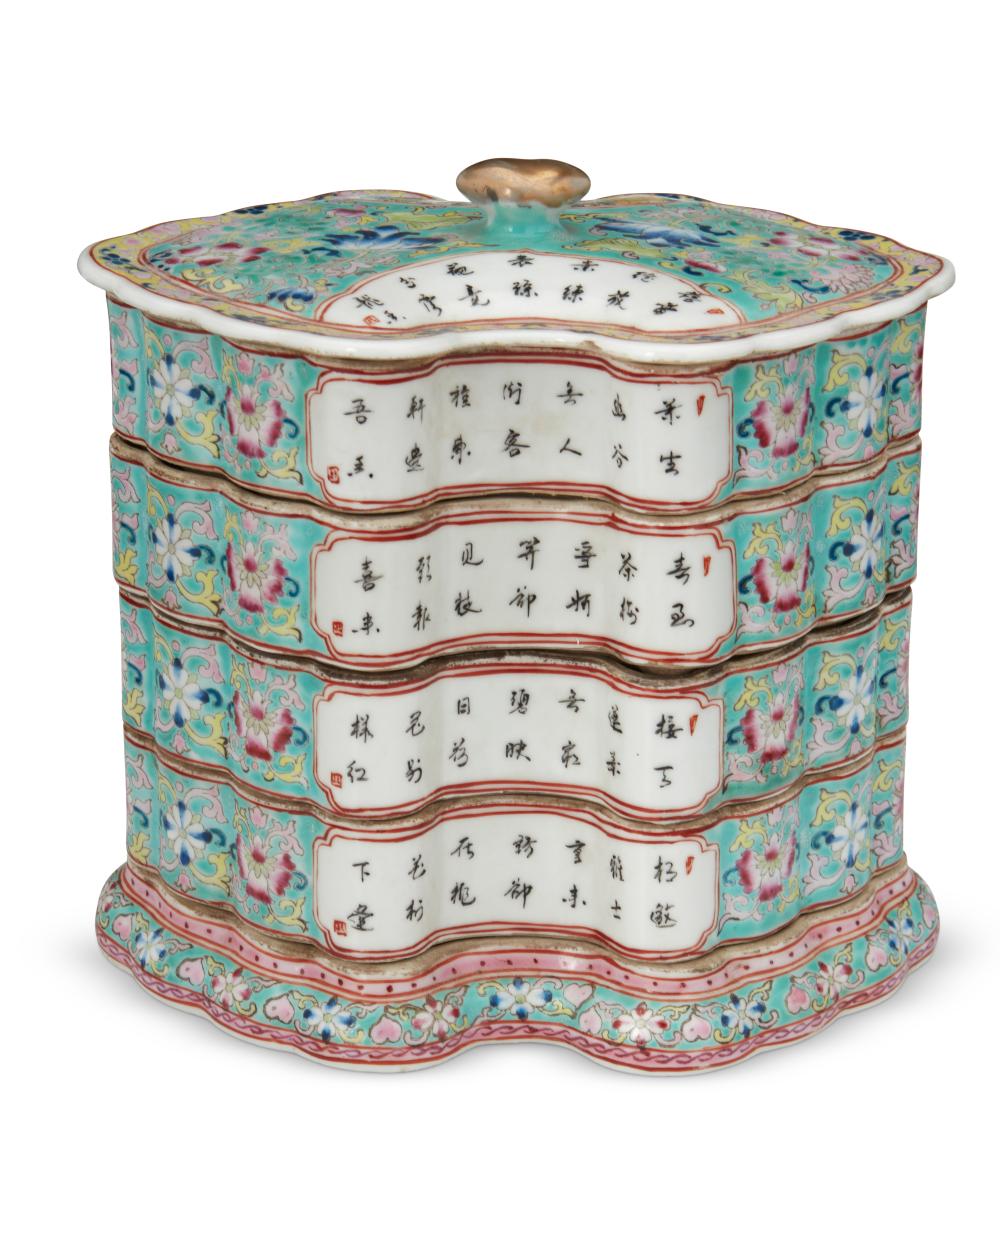 A CHINESE ENAMELED PORCELAIN STACKING 3433dc